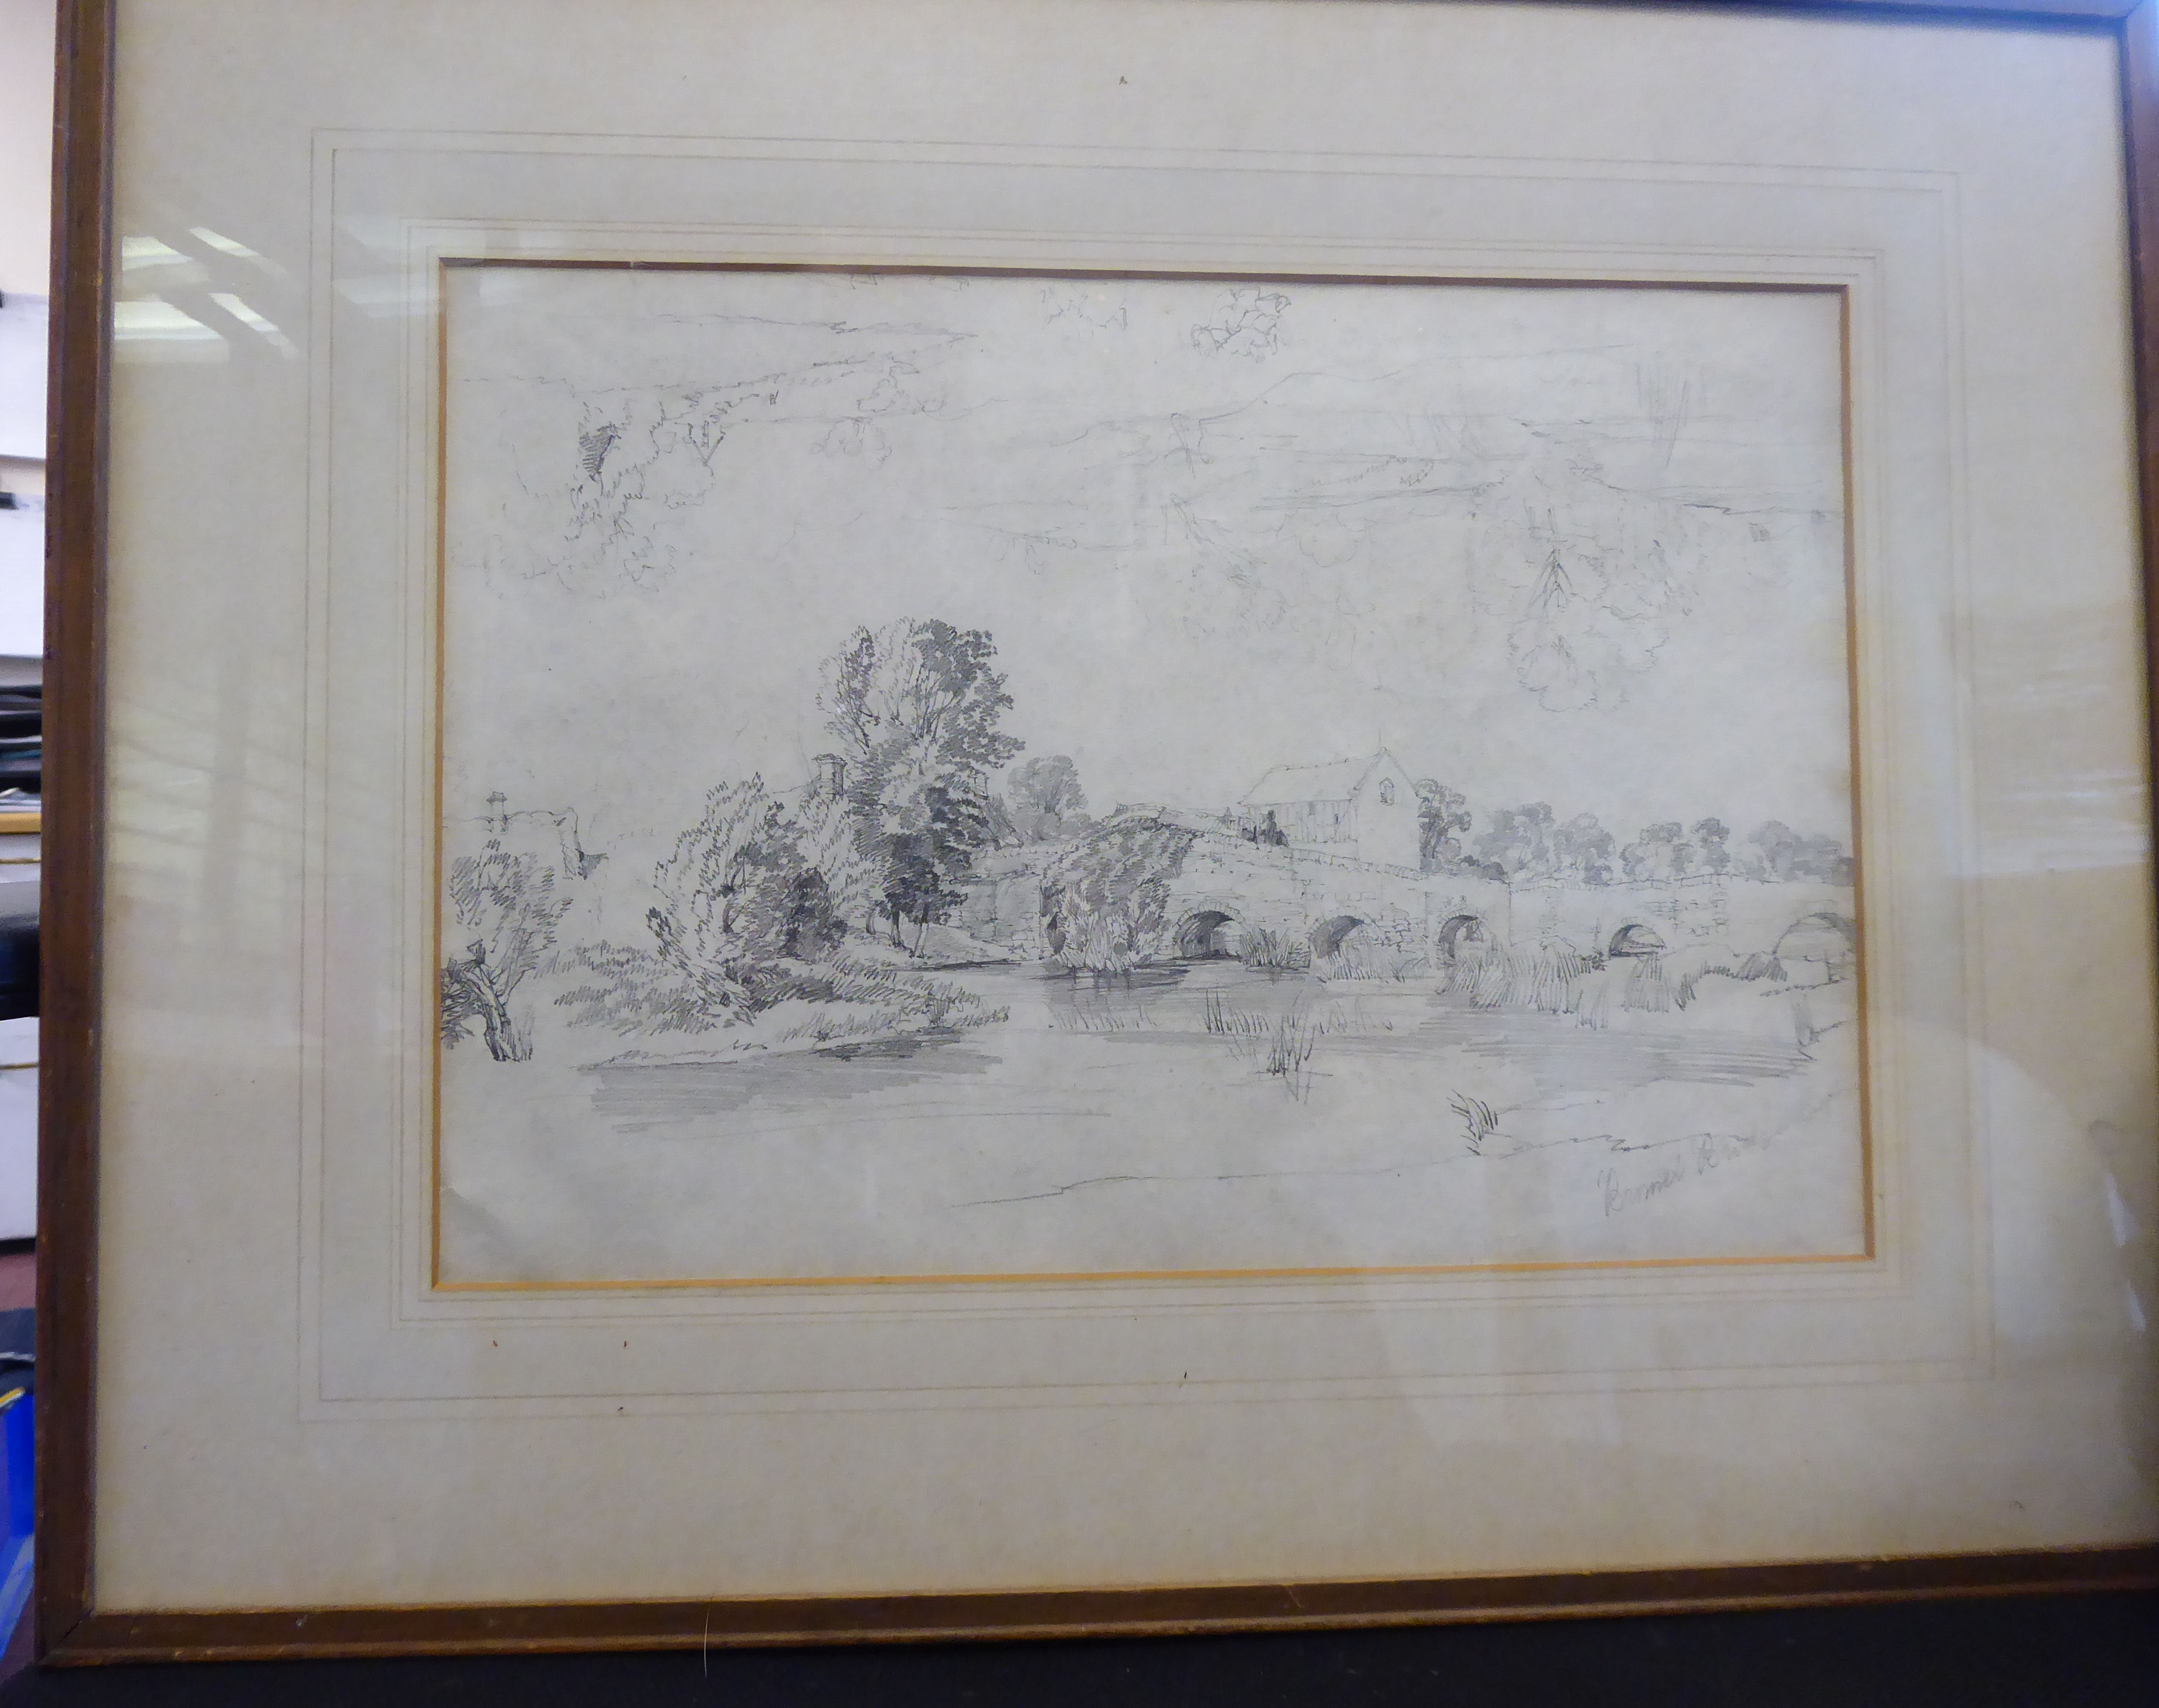 Attributed to James Duffield Hardy - 'Barnet Bridge' pencil studies 9'' x 13'' framed - Image 2 of 4